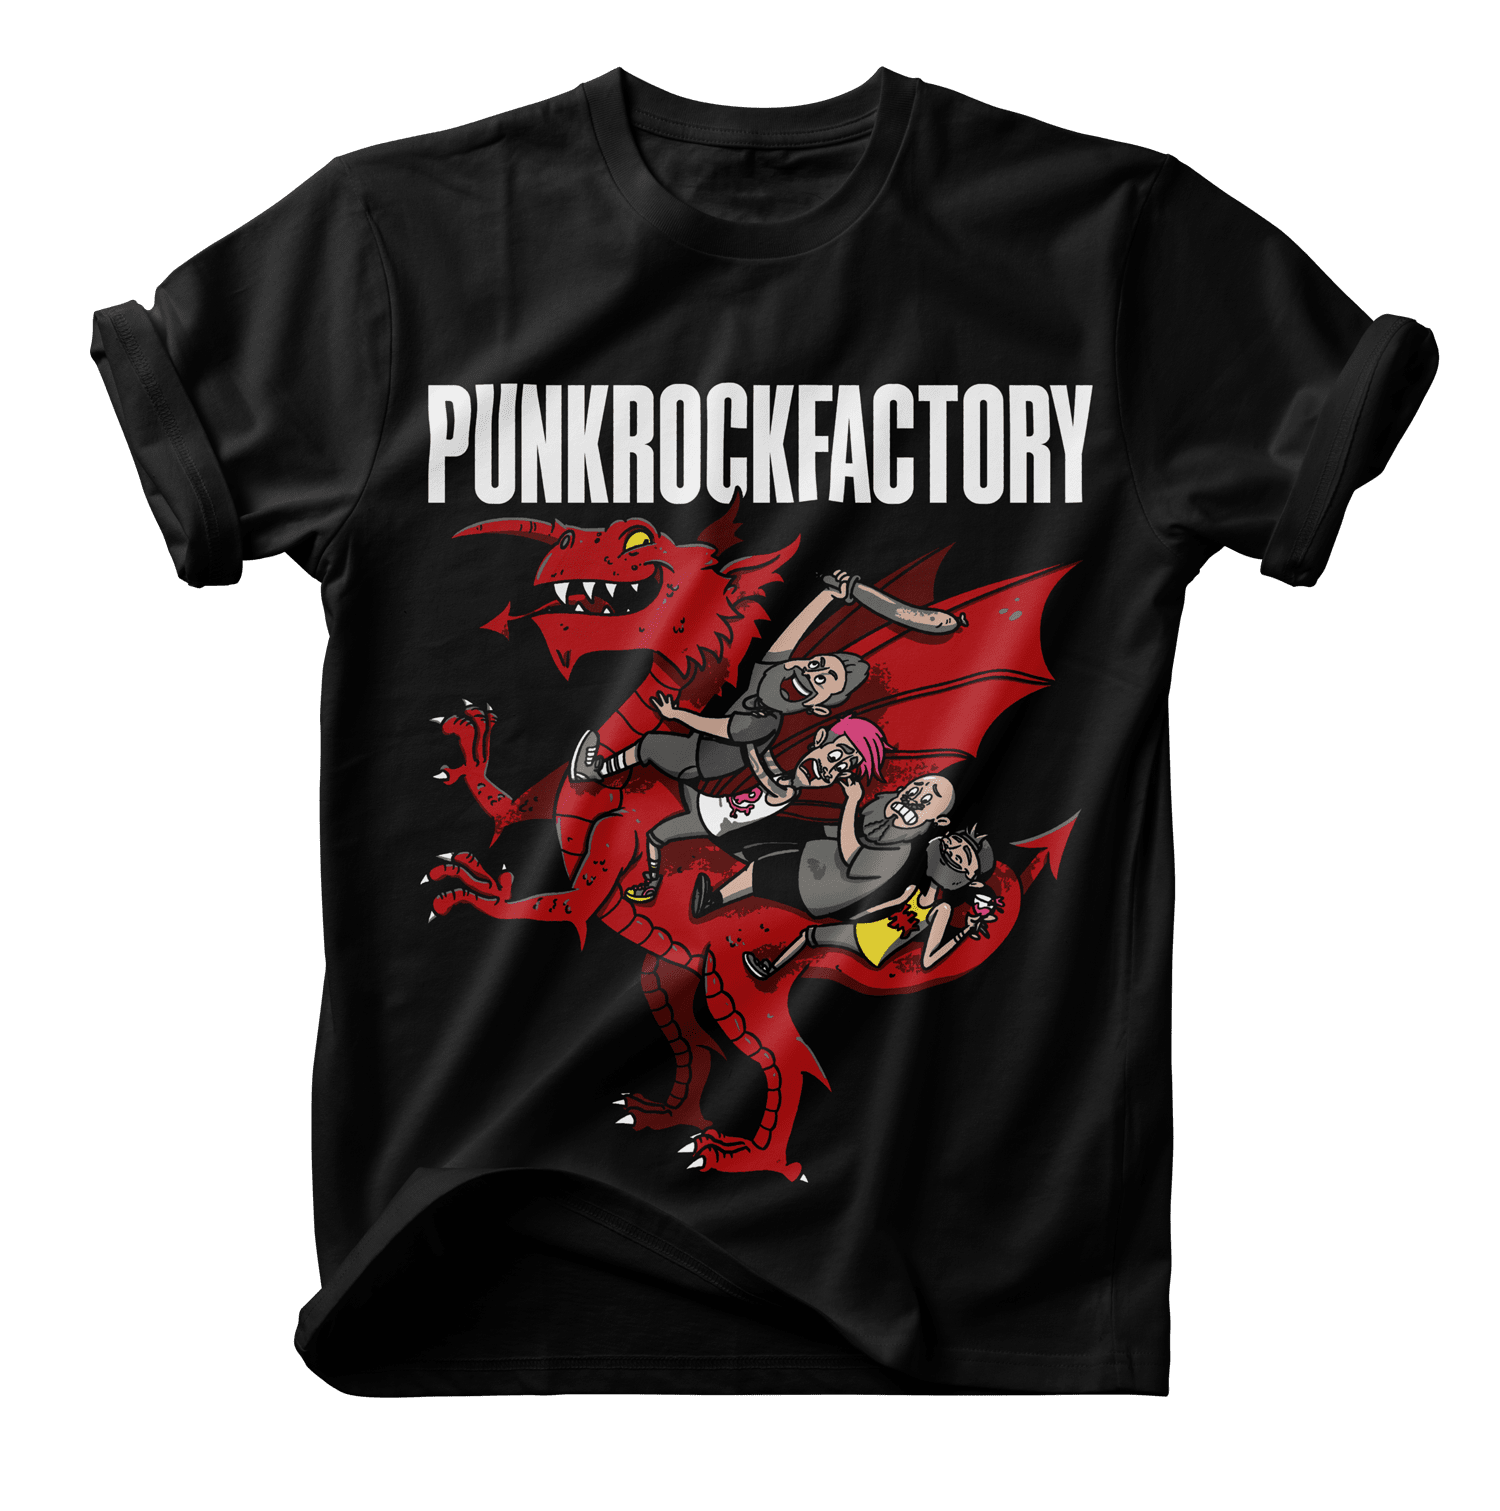 Boyos are Back in Town Tour Tee Apparel Punk Rock Factory 